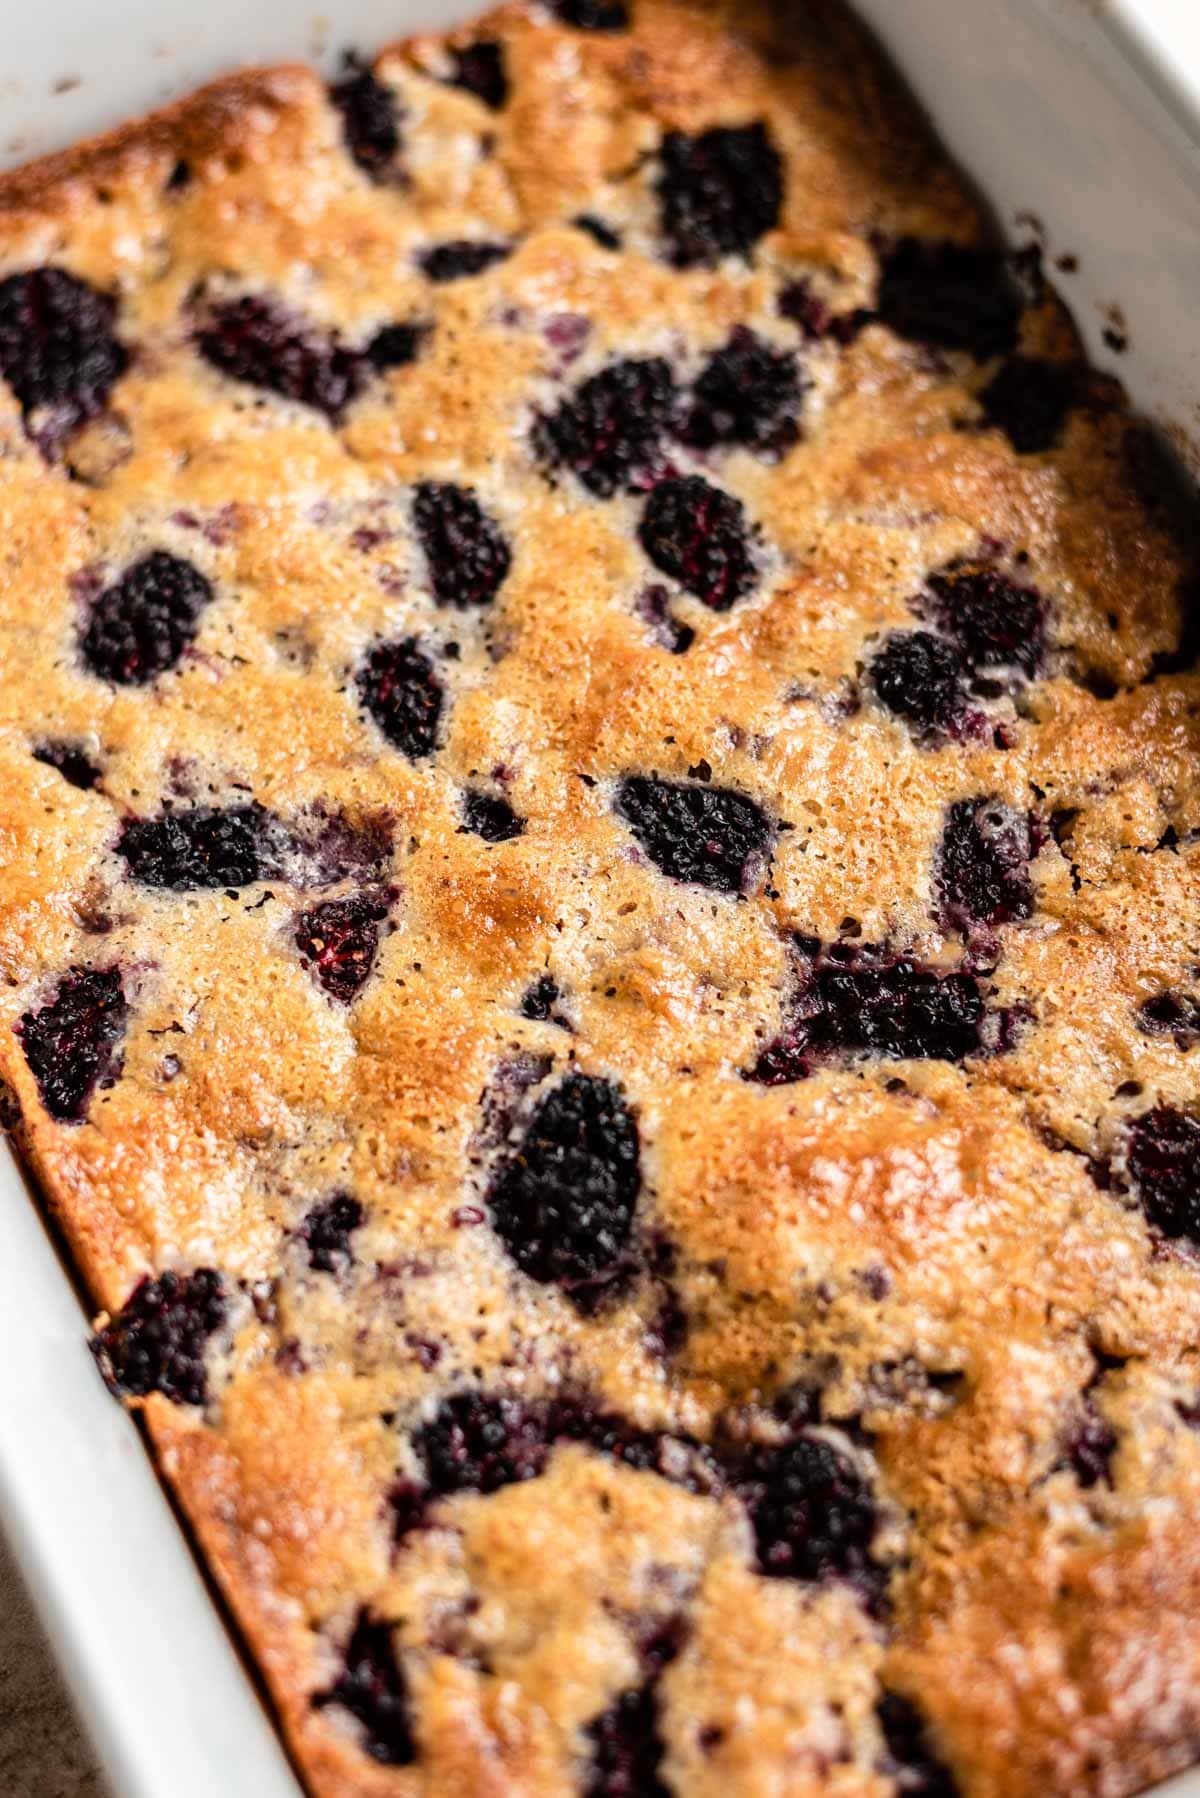 Finished blackberry cobbler in a white baking dish.